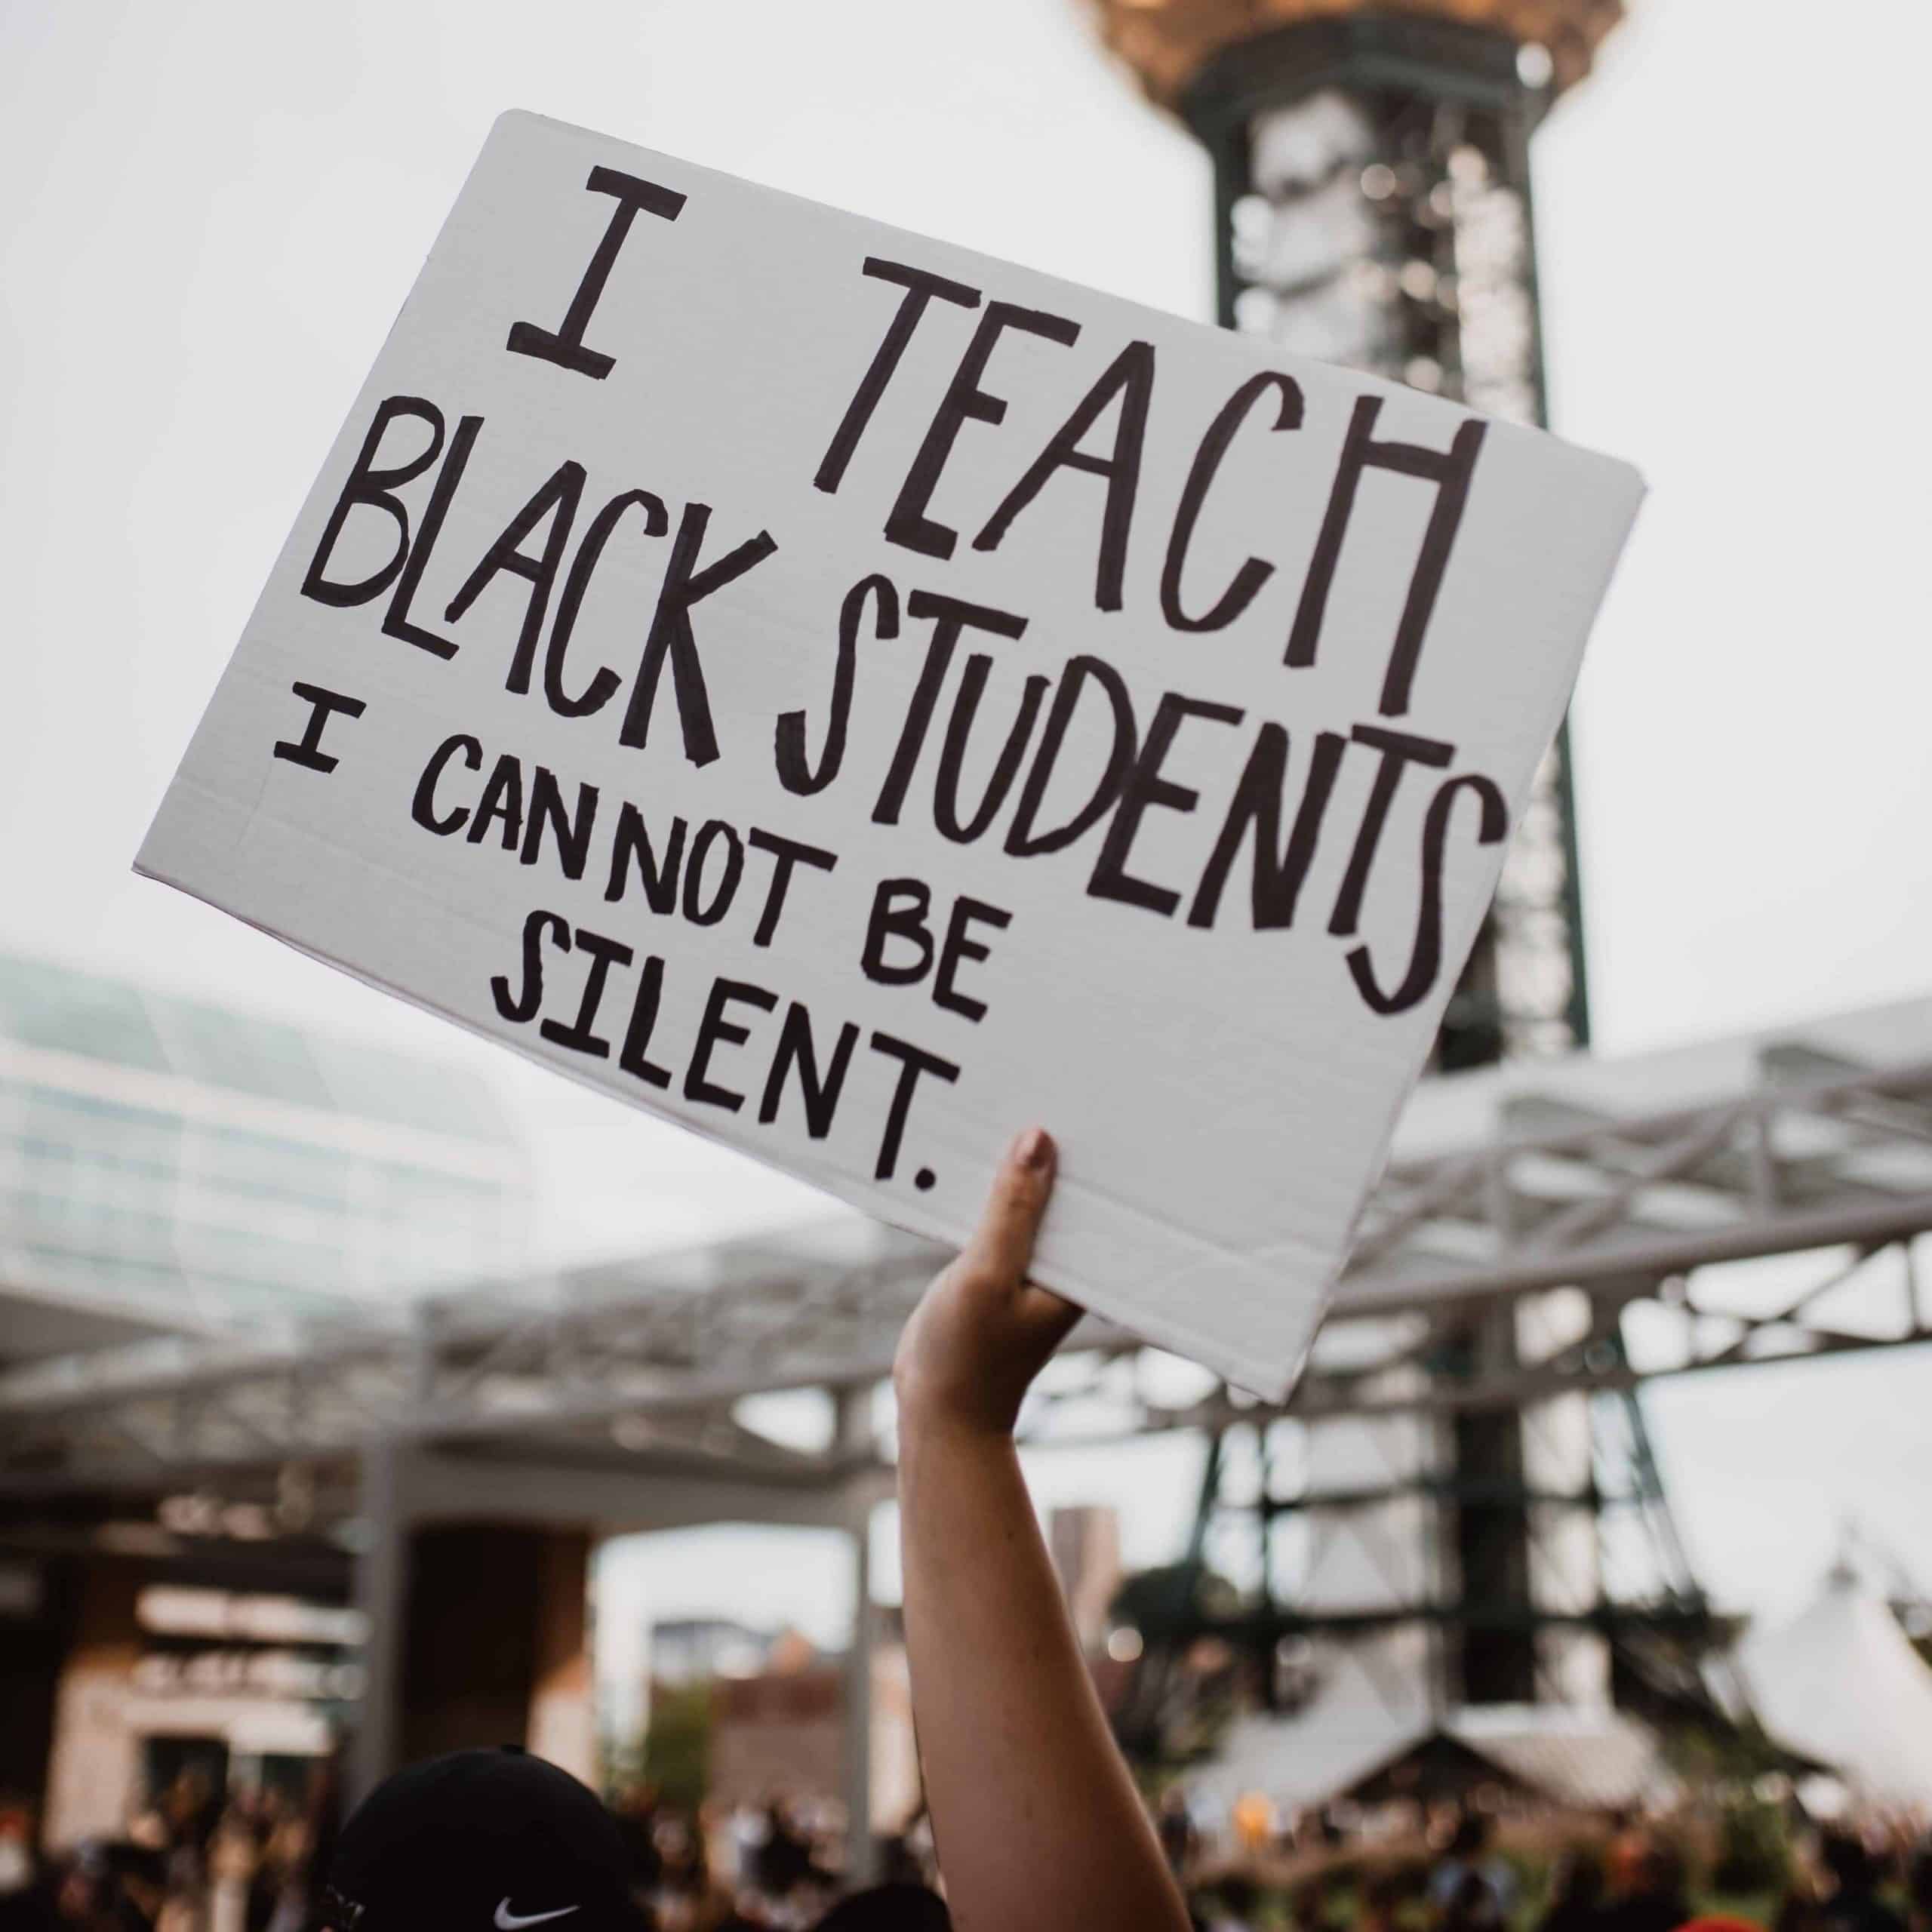 Sign reads "I Teach Black Students I Cannot Be Silent"